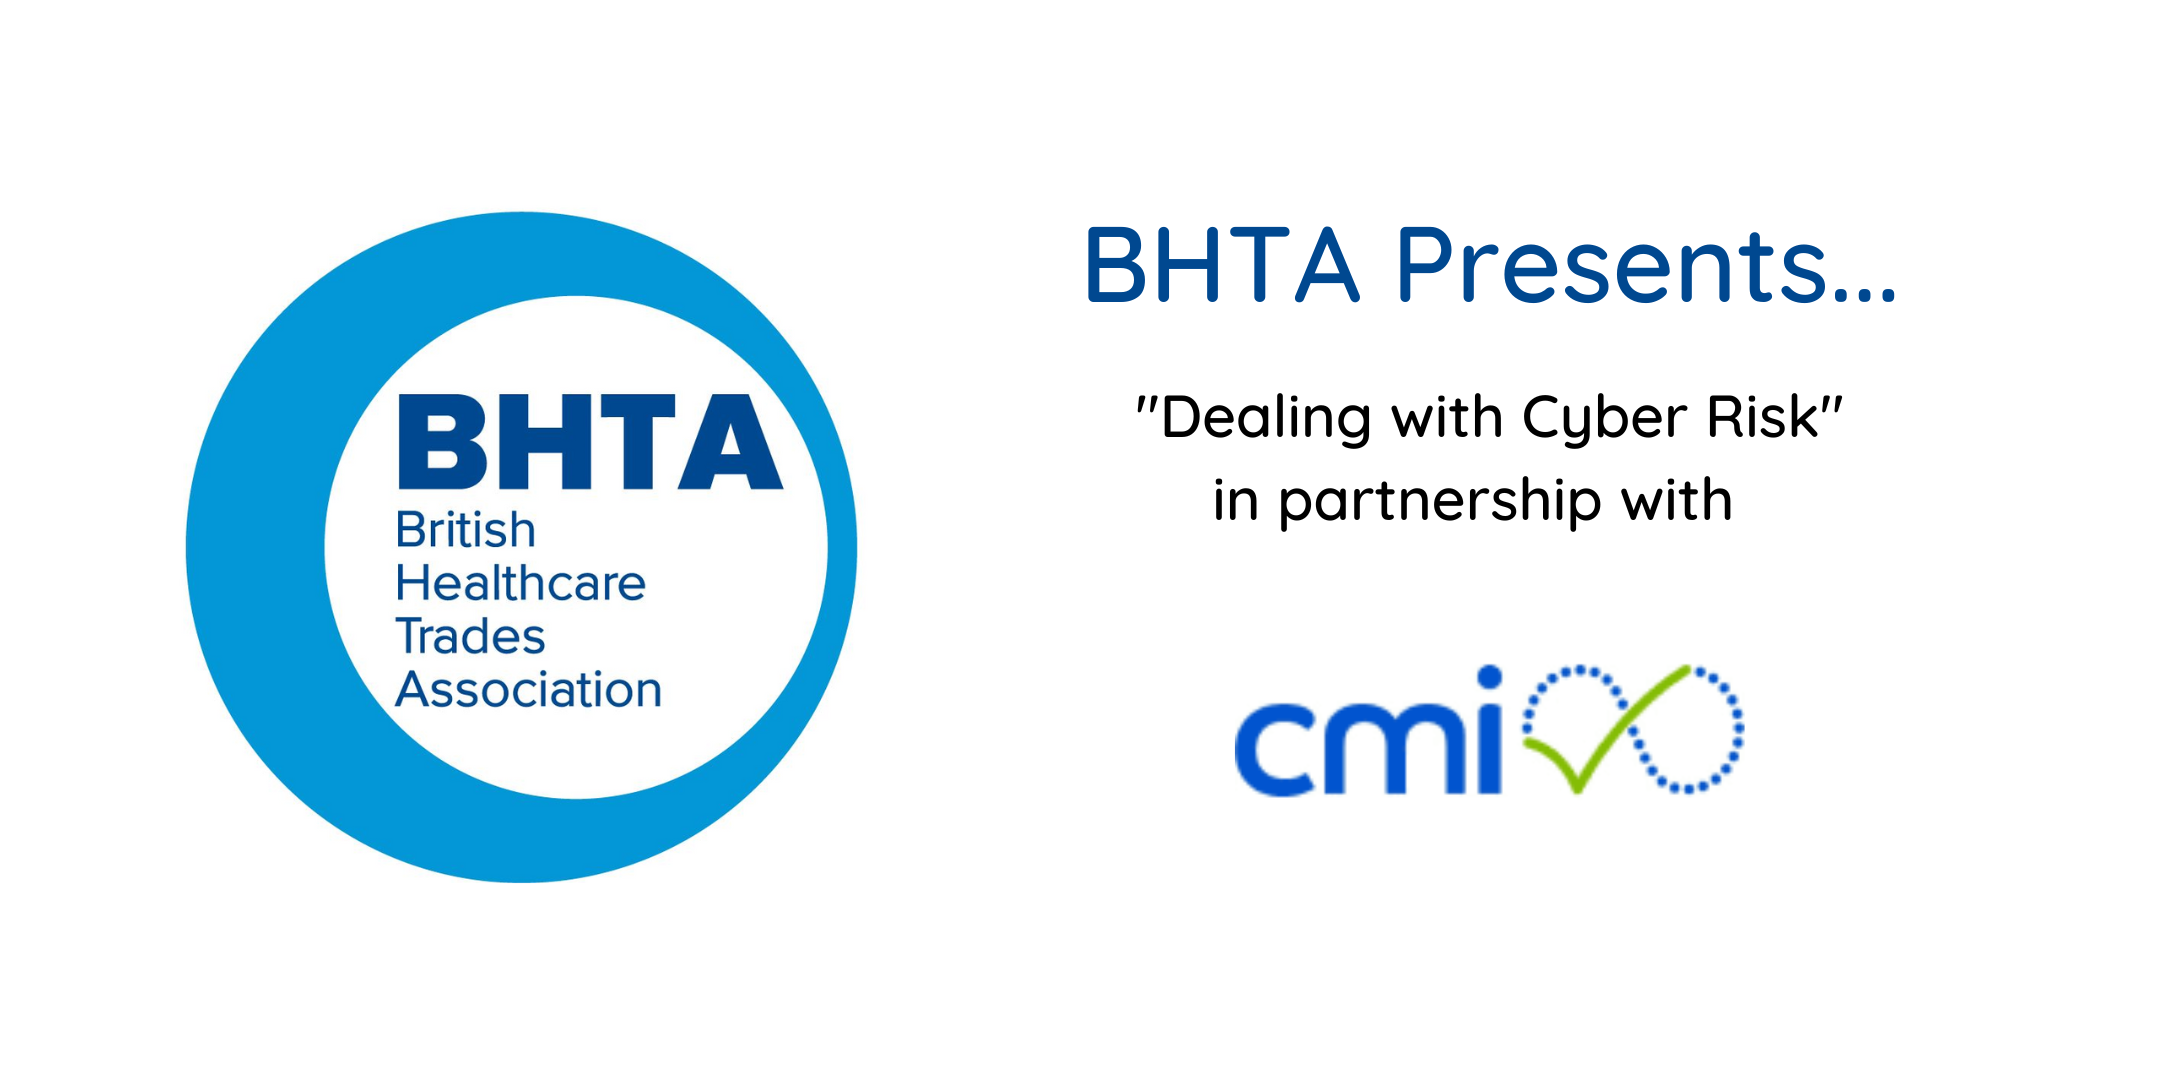 BHTA presents... "Dealing with Cyber Risk"